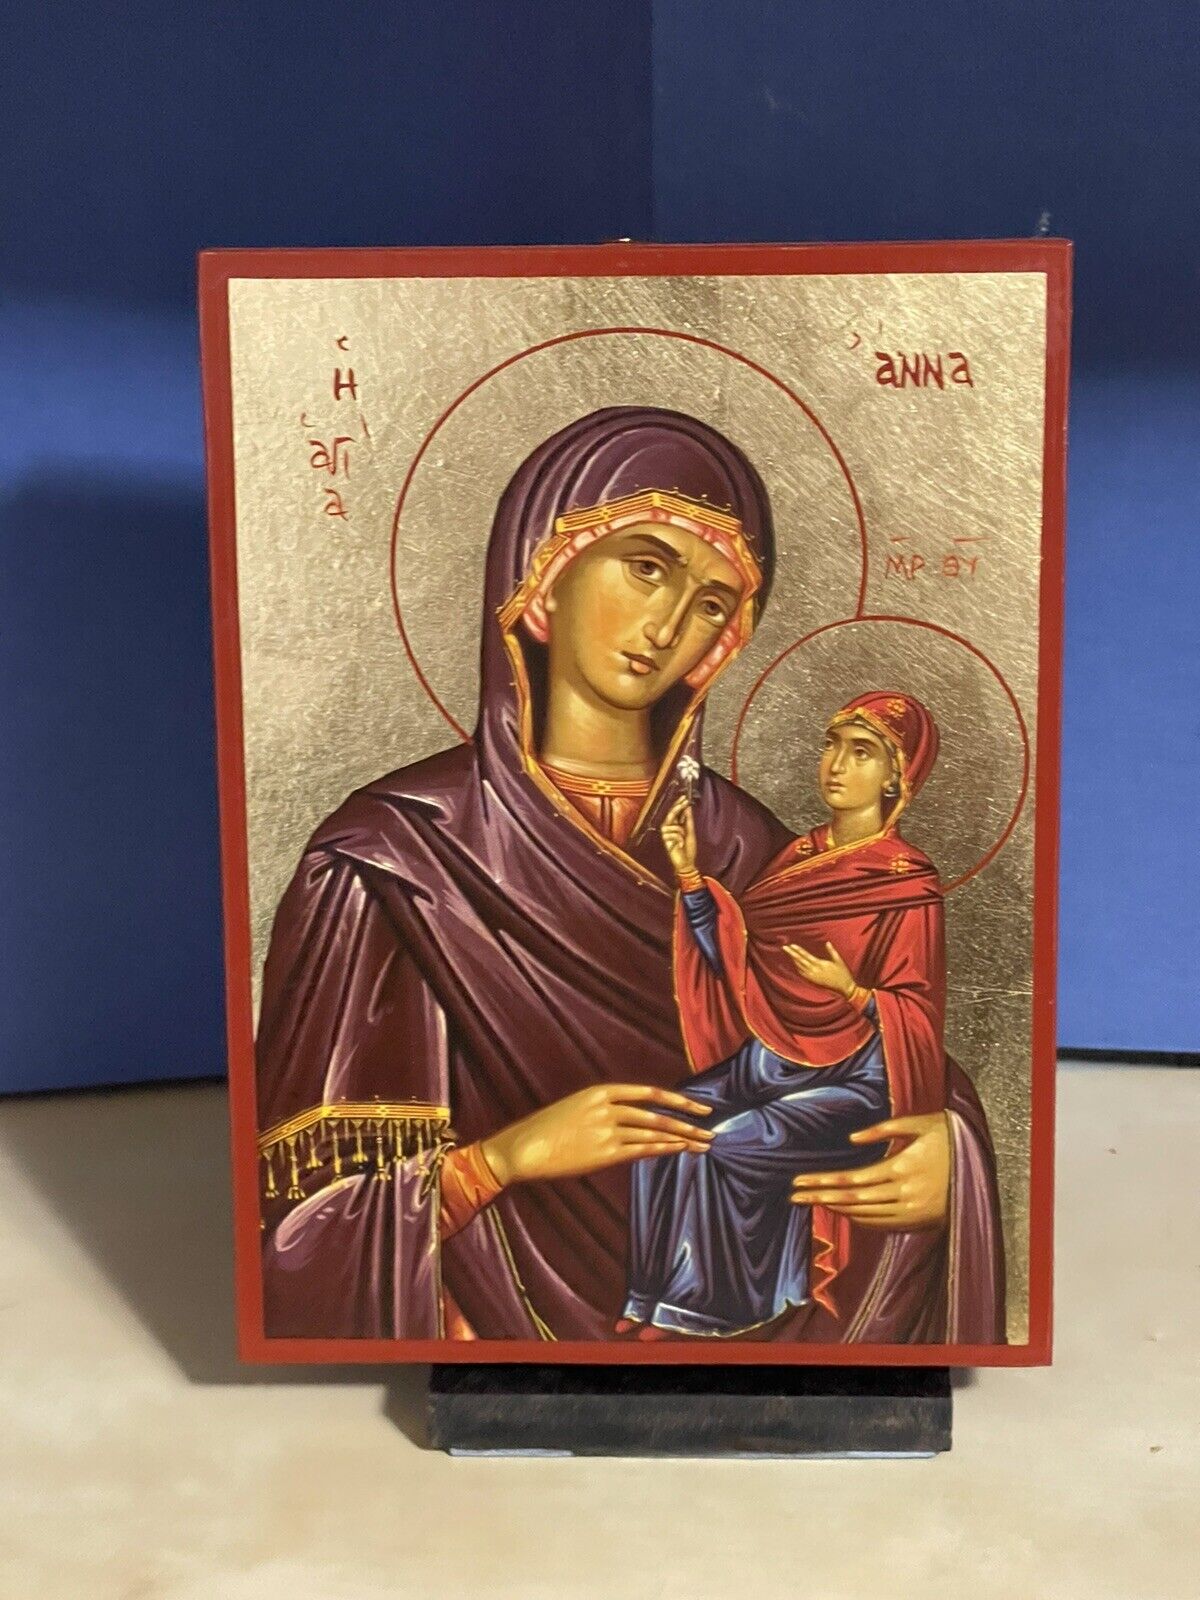 SAINT ANNE WITH VIRGIN -Greek Russian WOODEN ICON FLAT, WITH GOLD LEAF 5x7 Inch